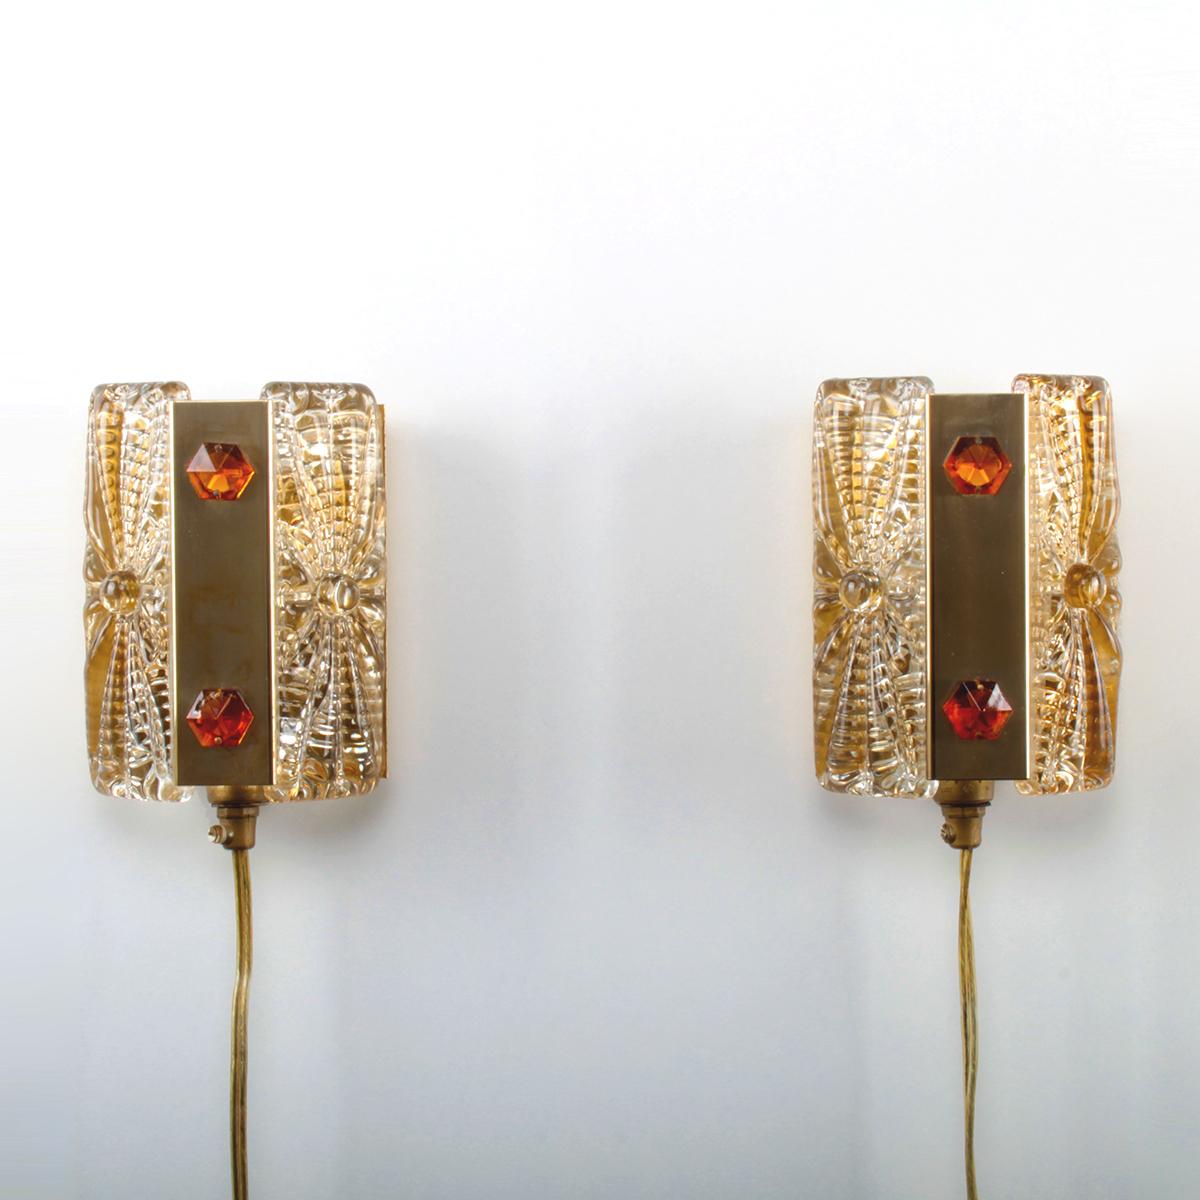 Regency Brass Sconces ‘Pair’ with Pressed Glass and Brass by Vitrika, 1970s